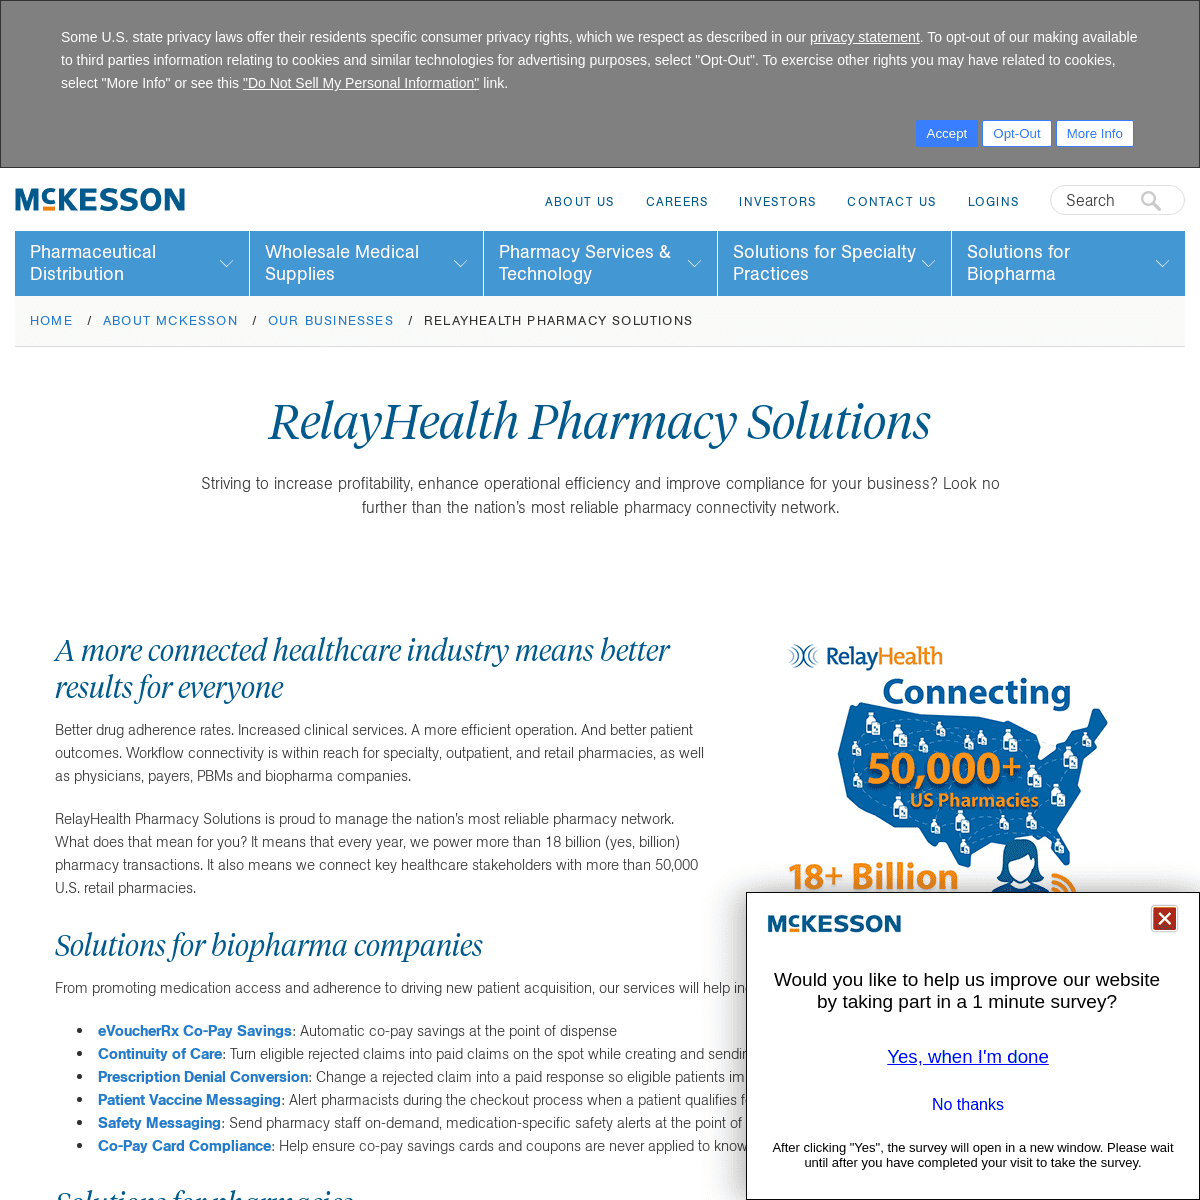 A complete backup of relayhealth.com